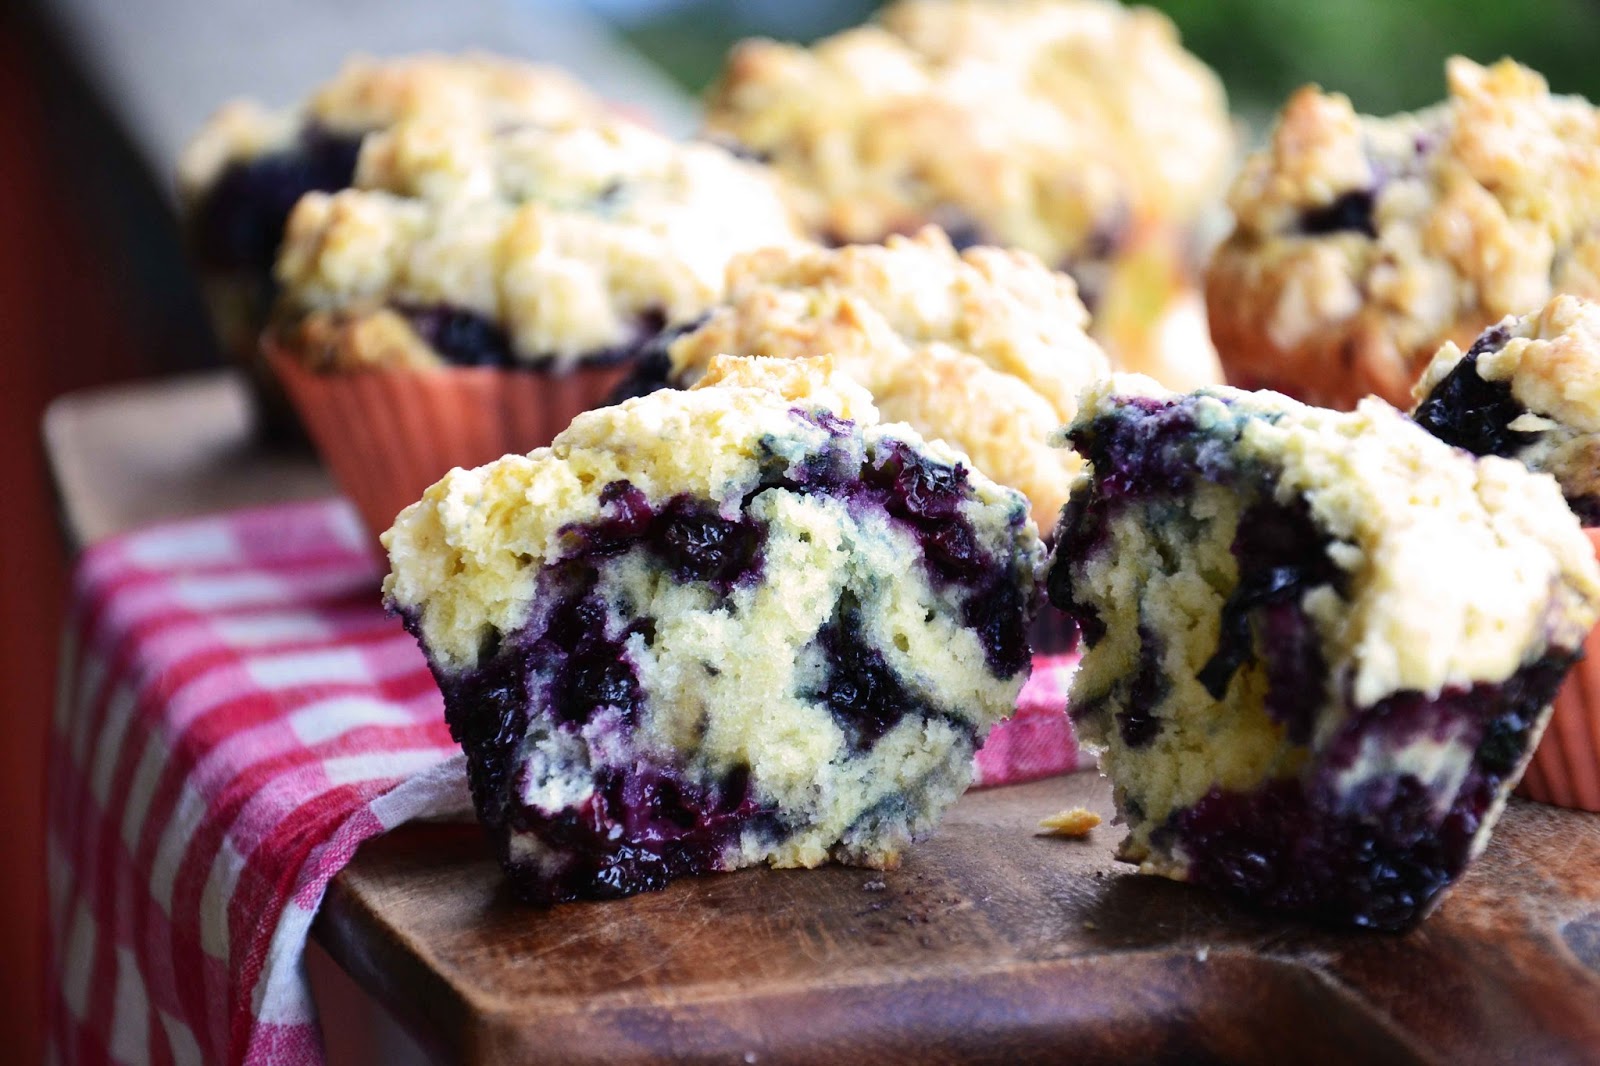 The eccentric Cook: Blueberry Muffins